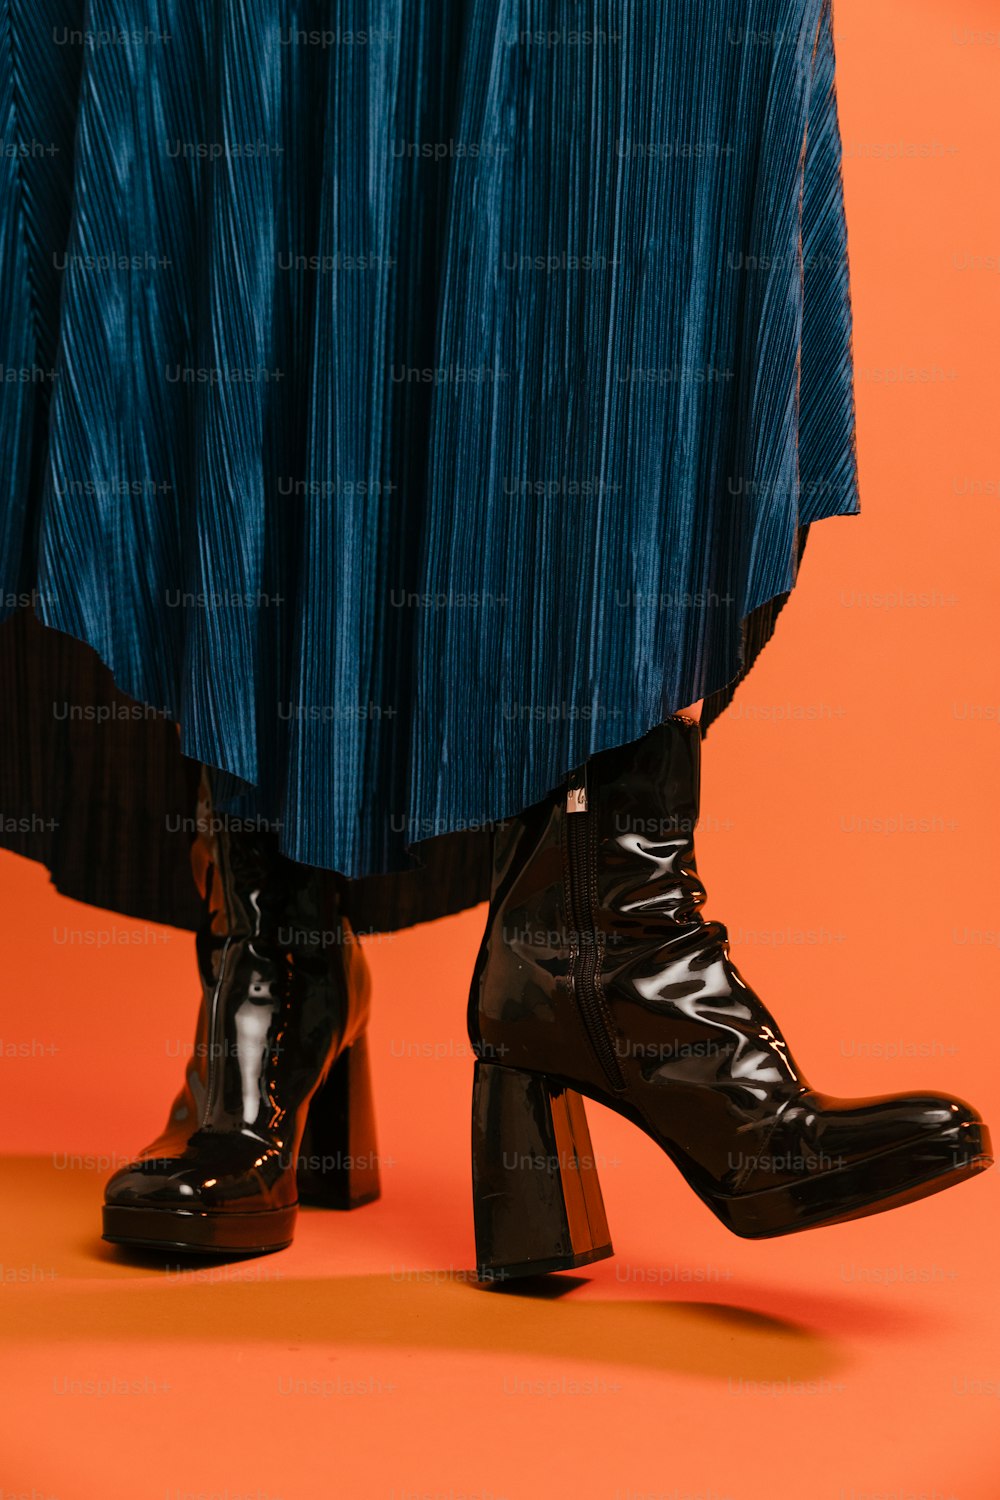 a woman's legs in high heeled black boots